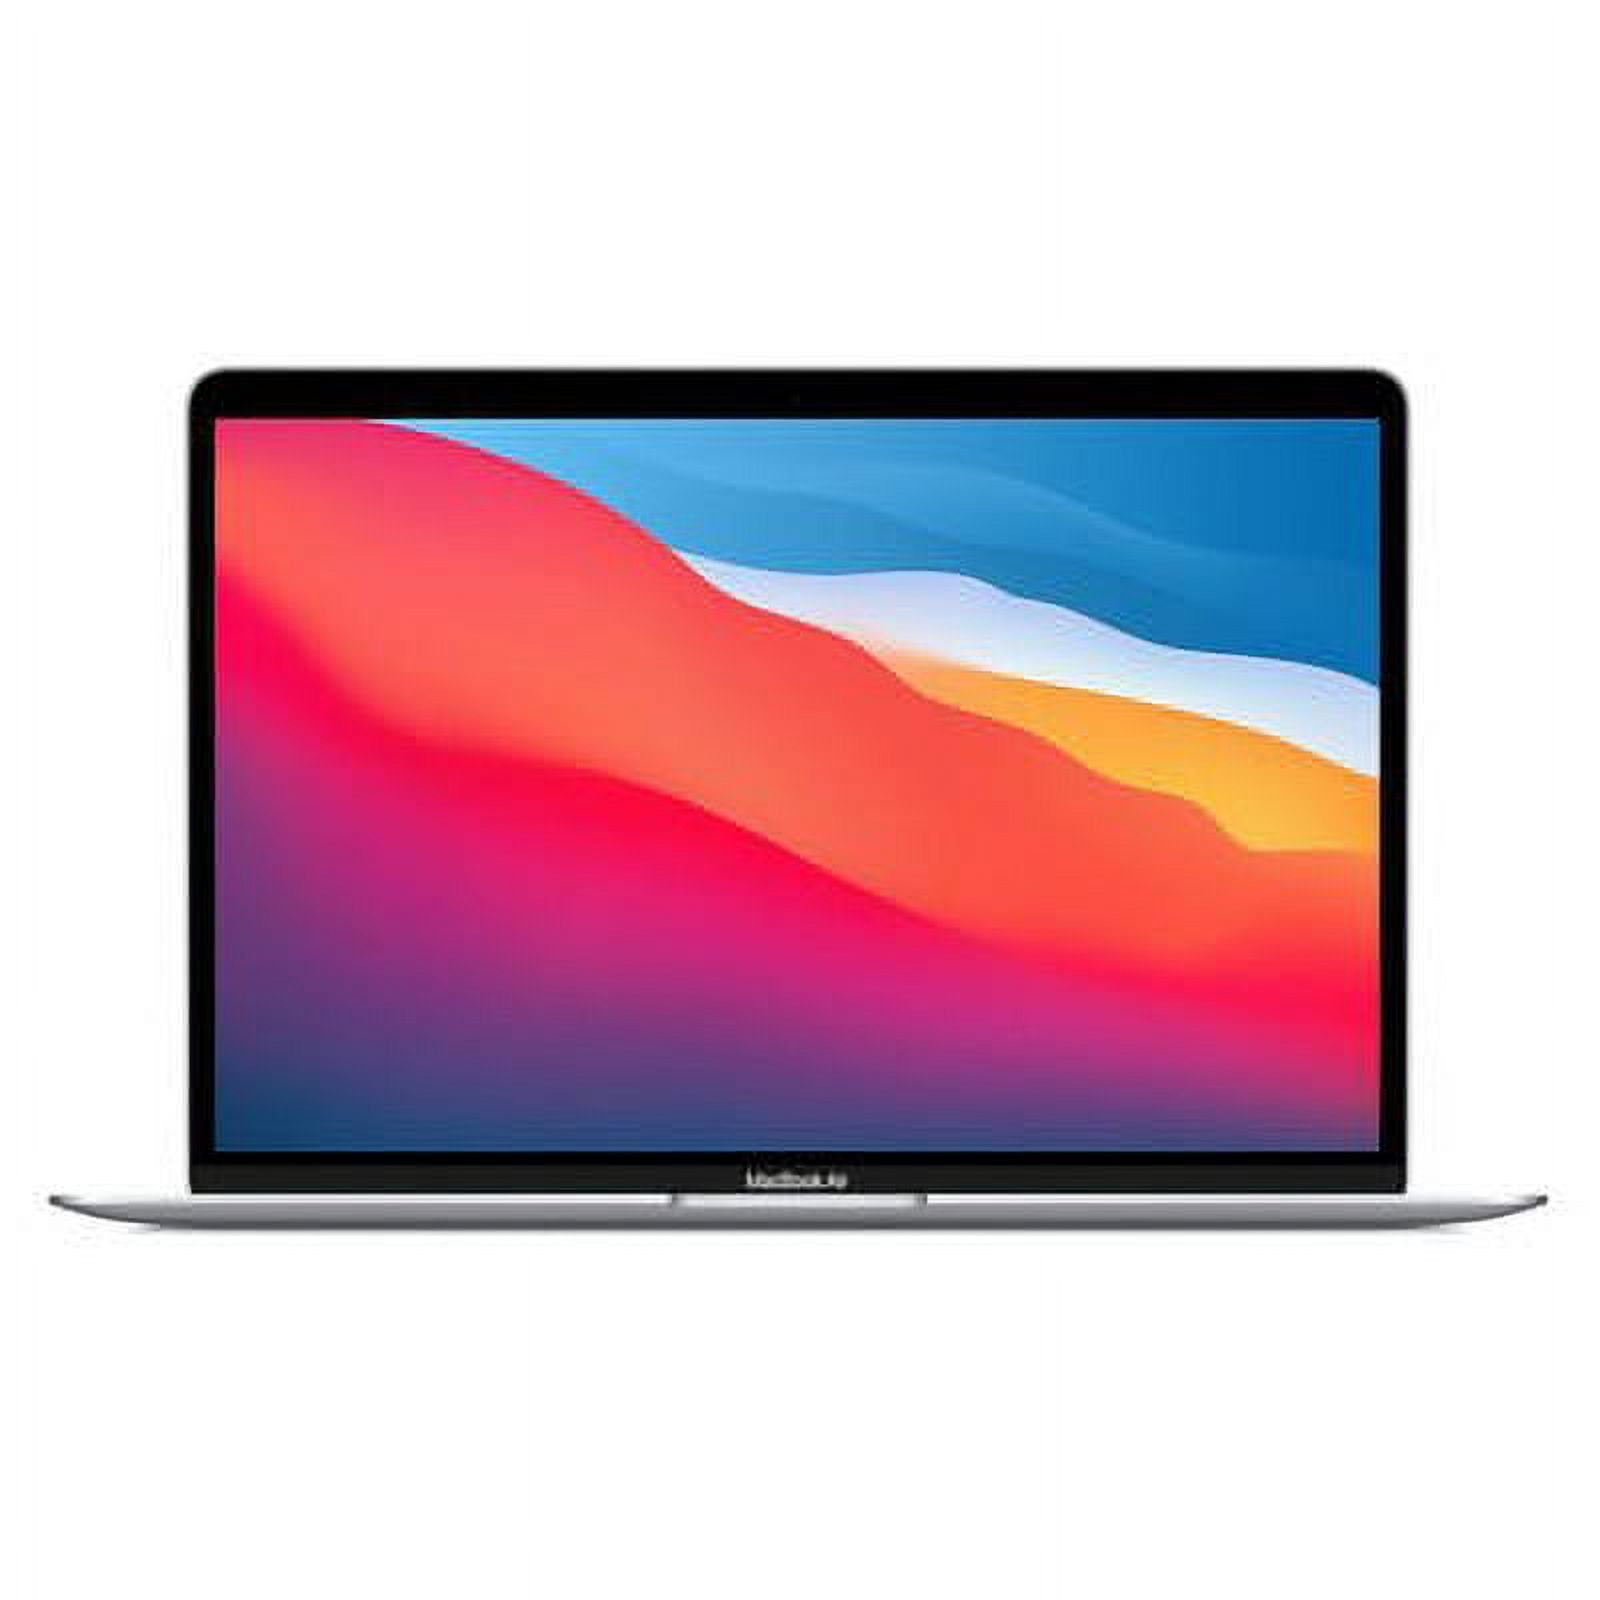 Used 2020 Apple MacBook Air (13 Inch, Space Gray, 1.1GHz i3, 8GB